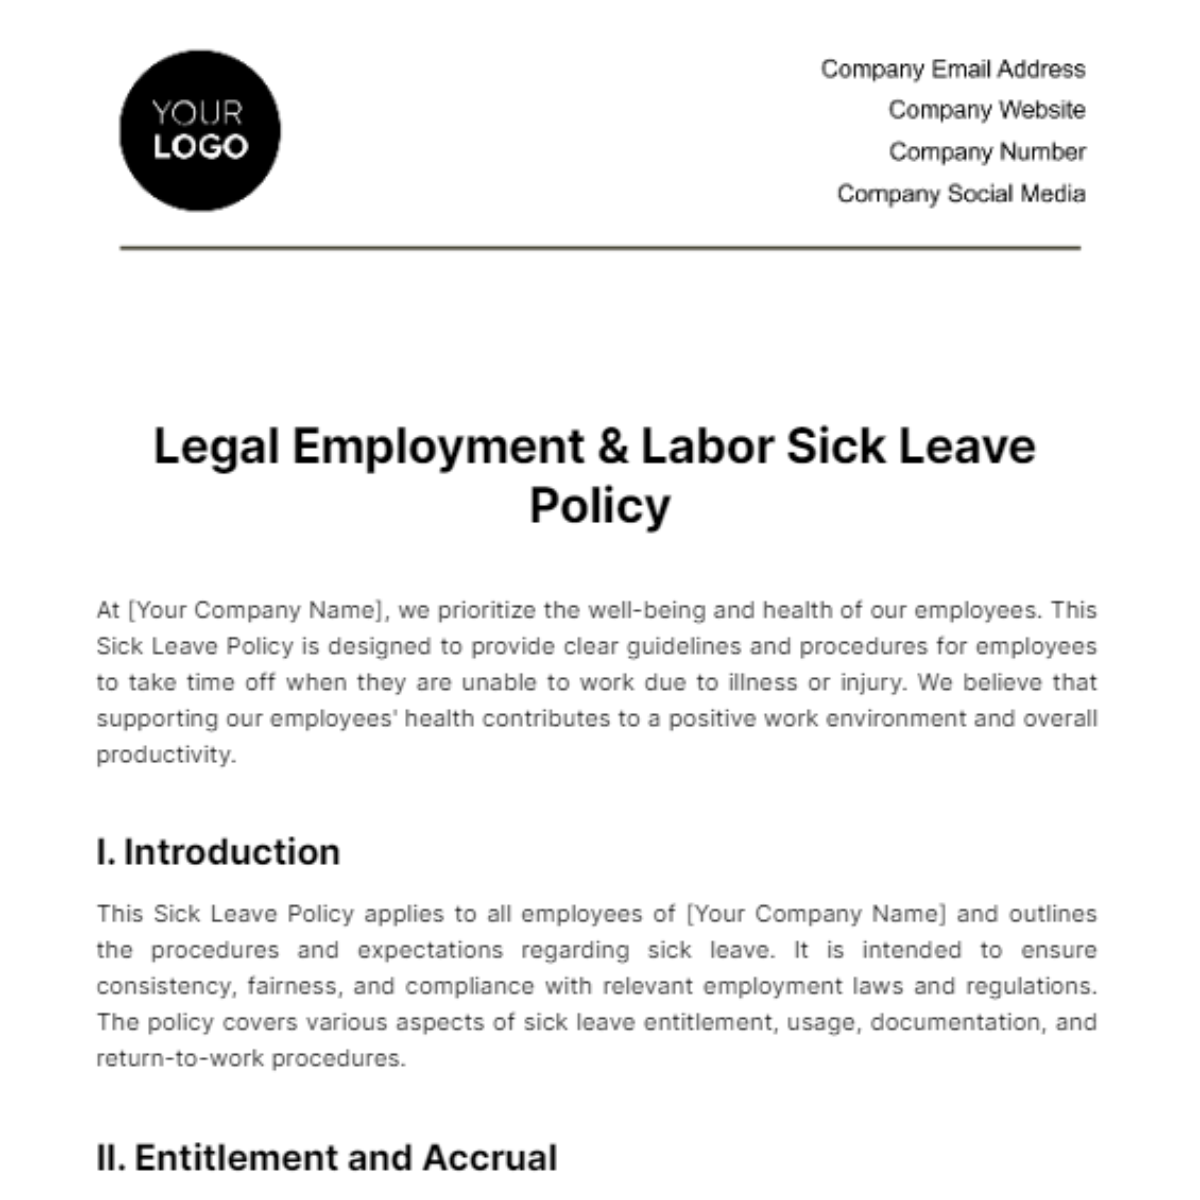 Free Legal Employment & Labor Sick Leave Policy Template